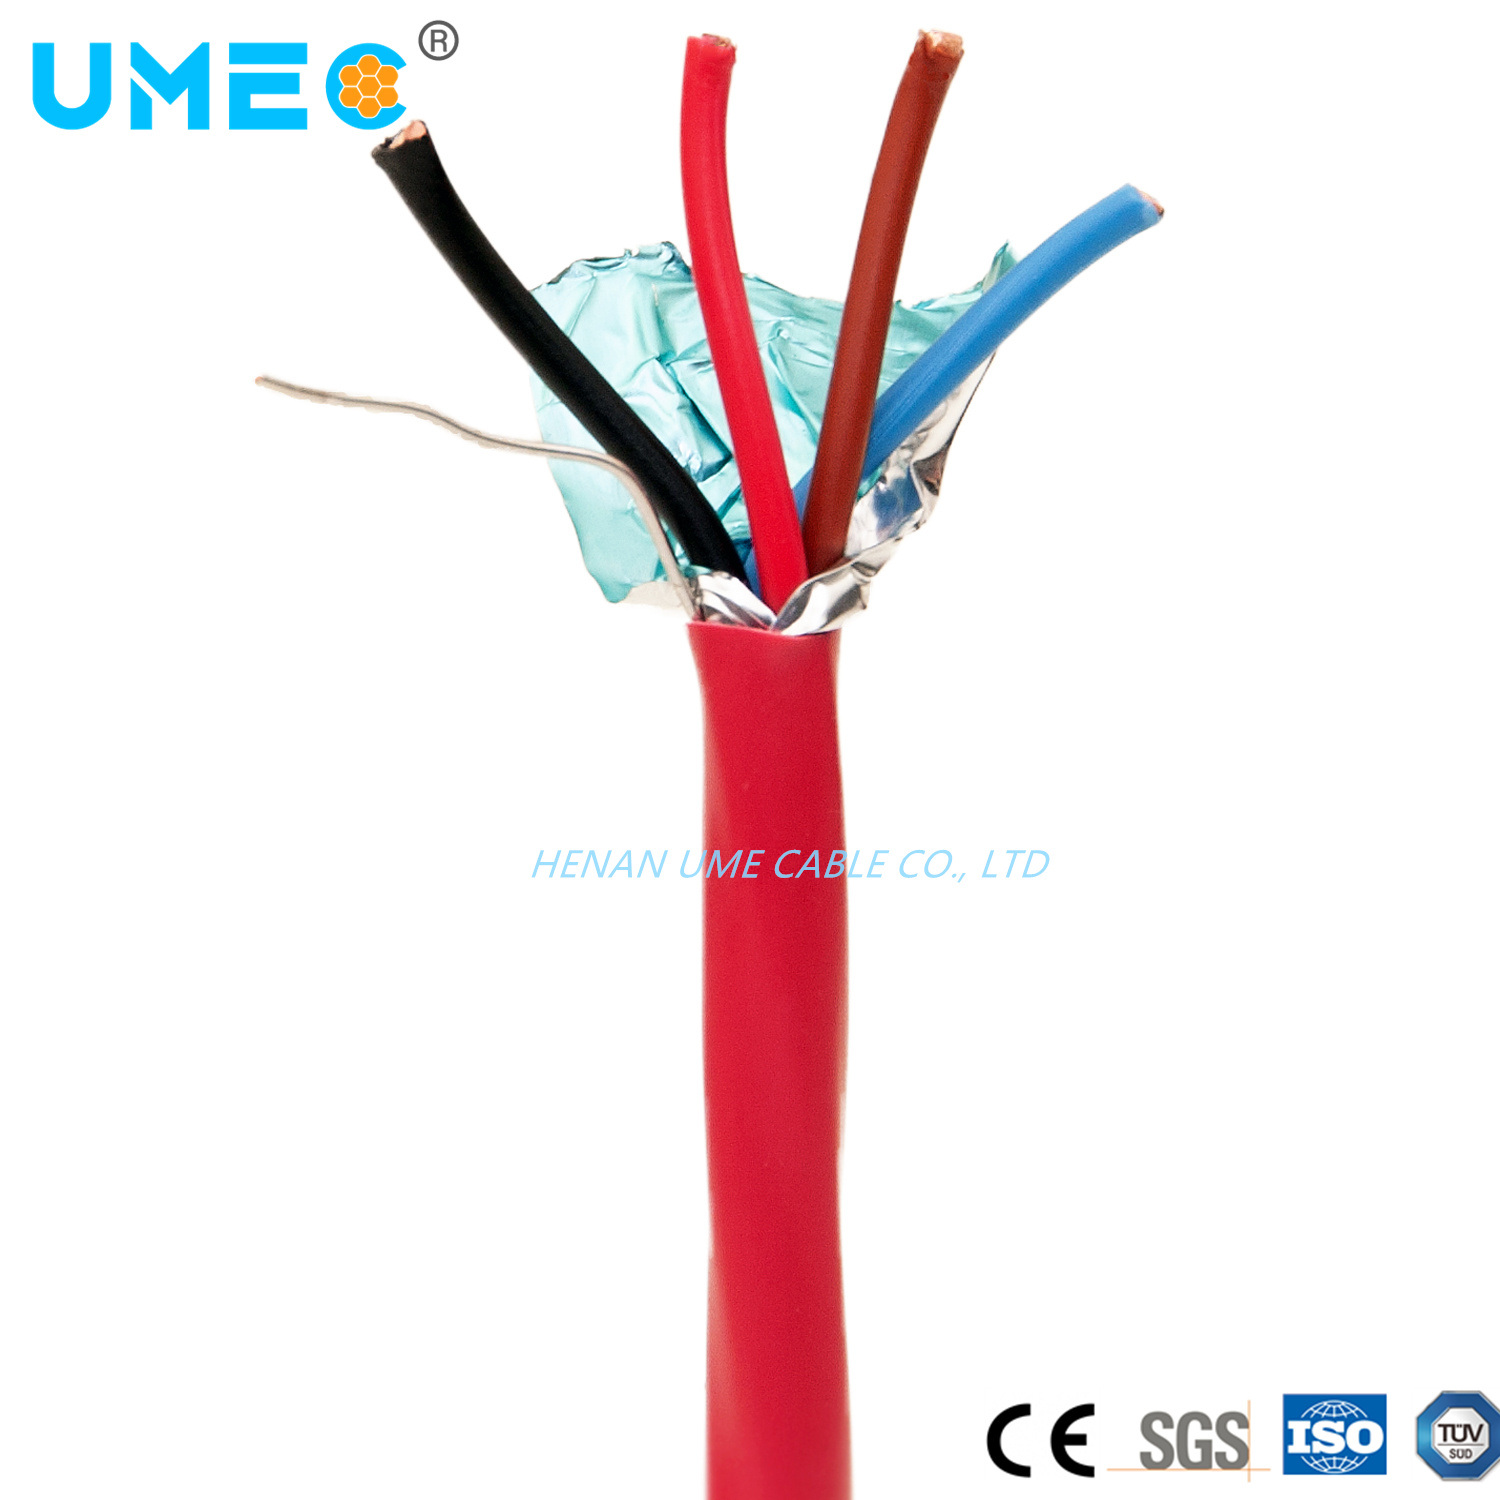 Fire Alarm Cable Fpl/Fplp/Fplr Cable